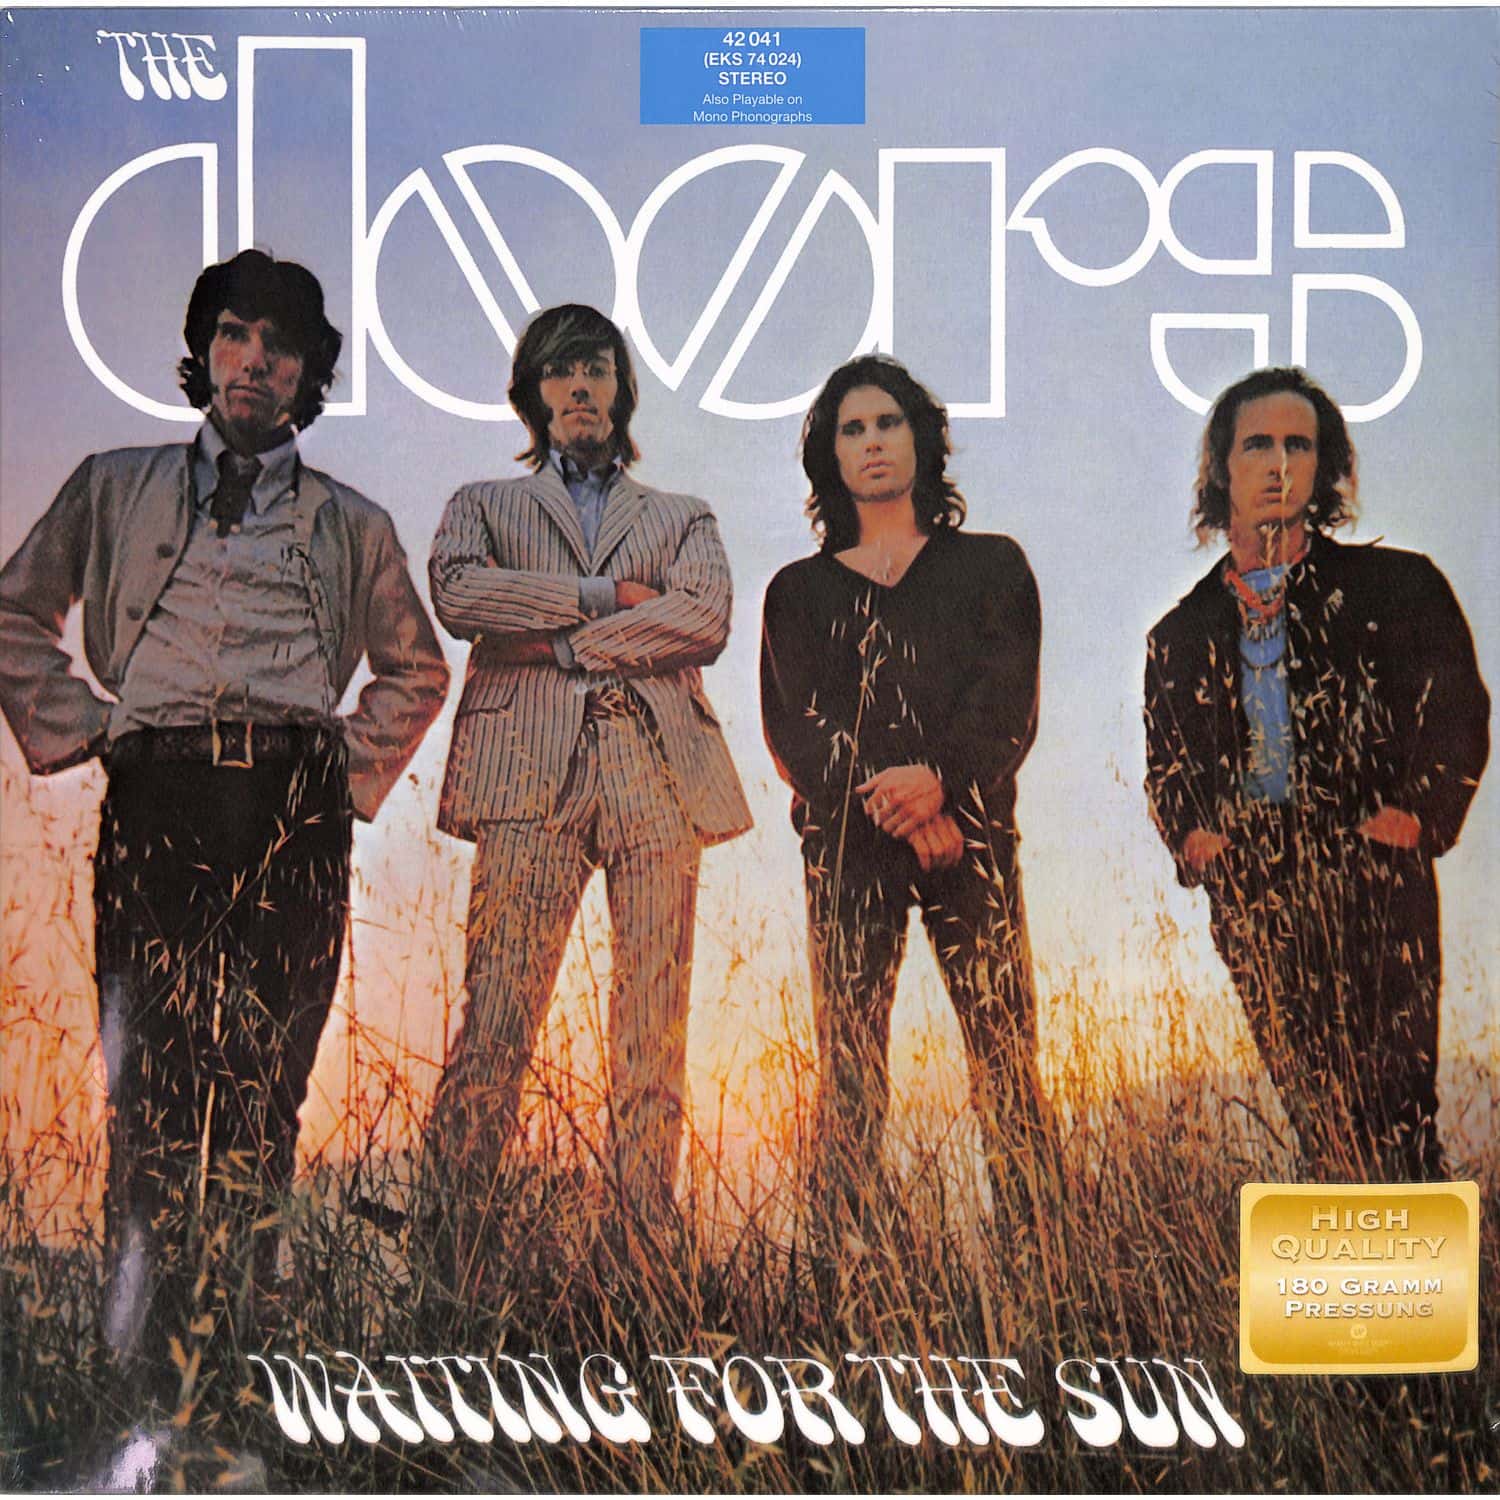 The Doors - WAITING FOR THE SUN 